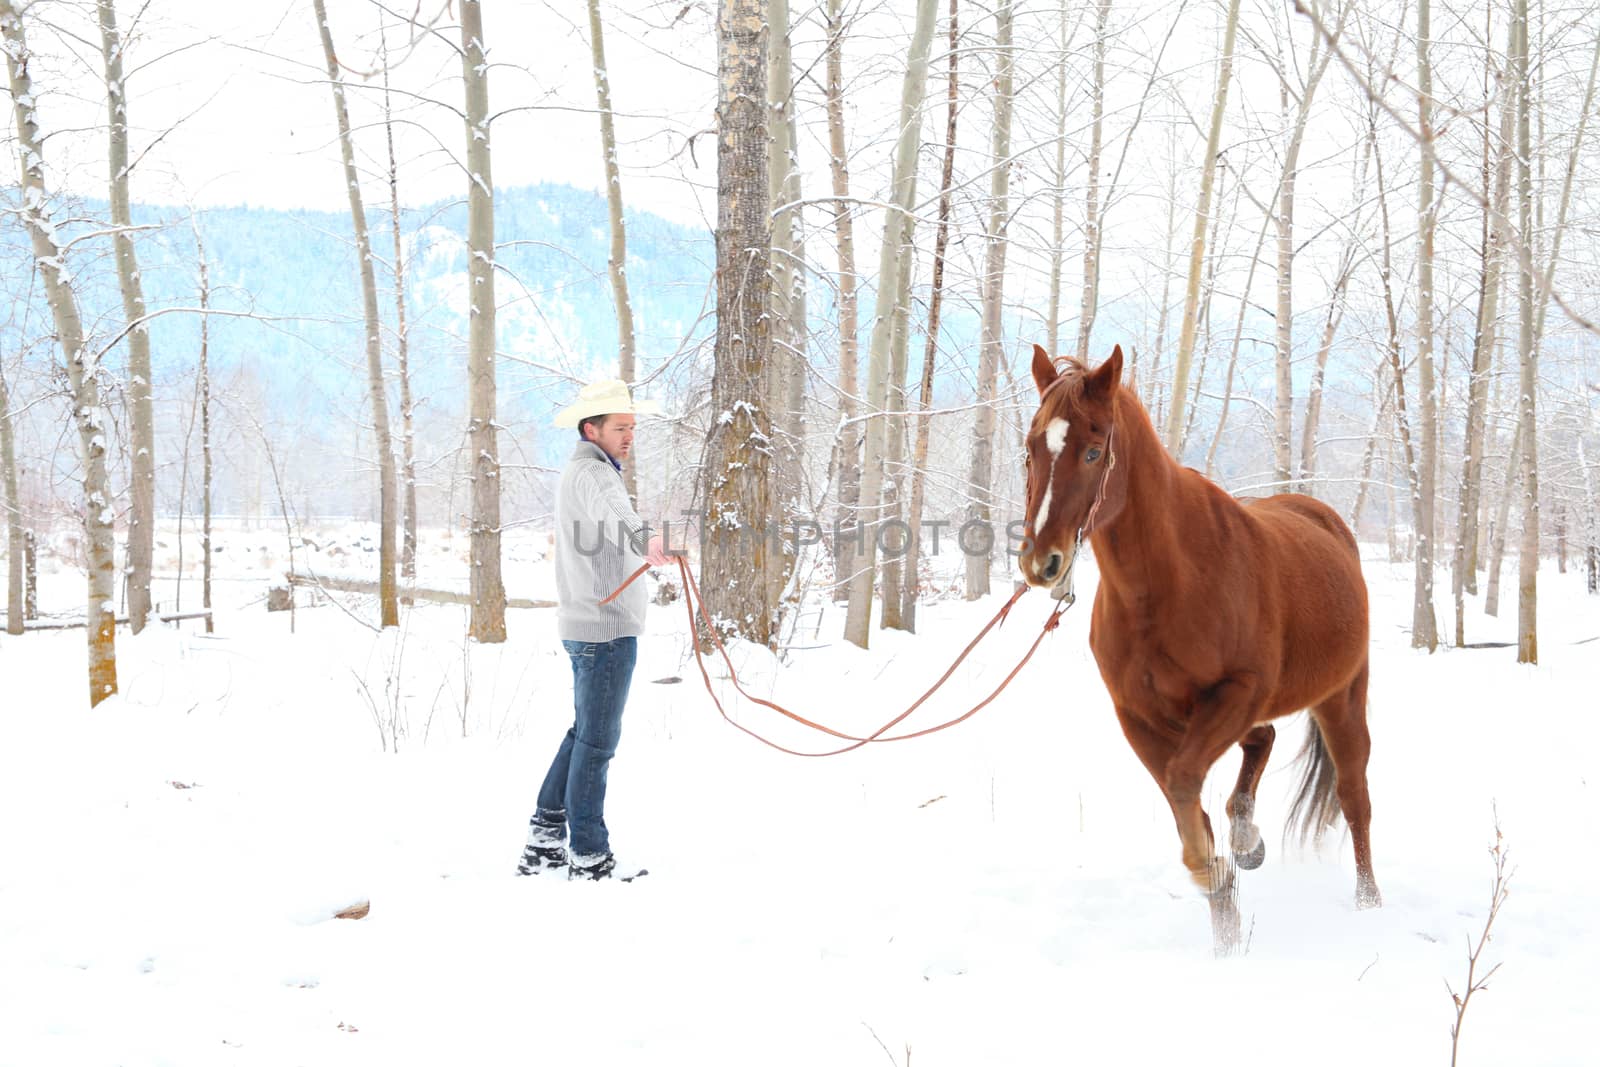 Winter cowboy by vanell